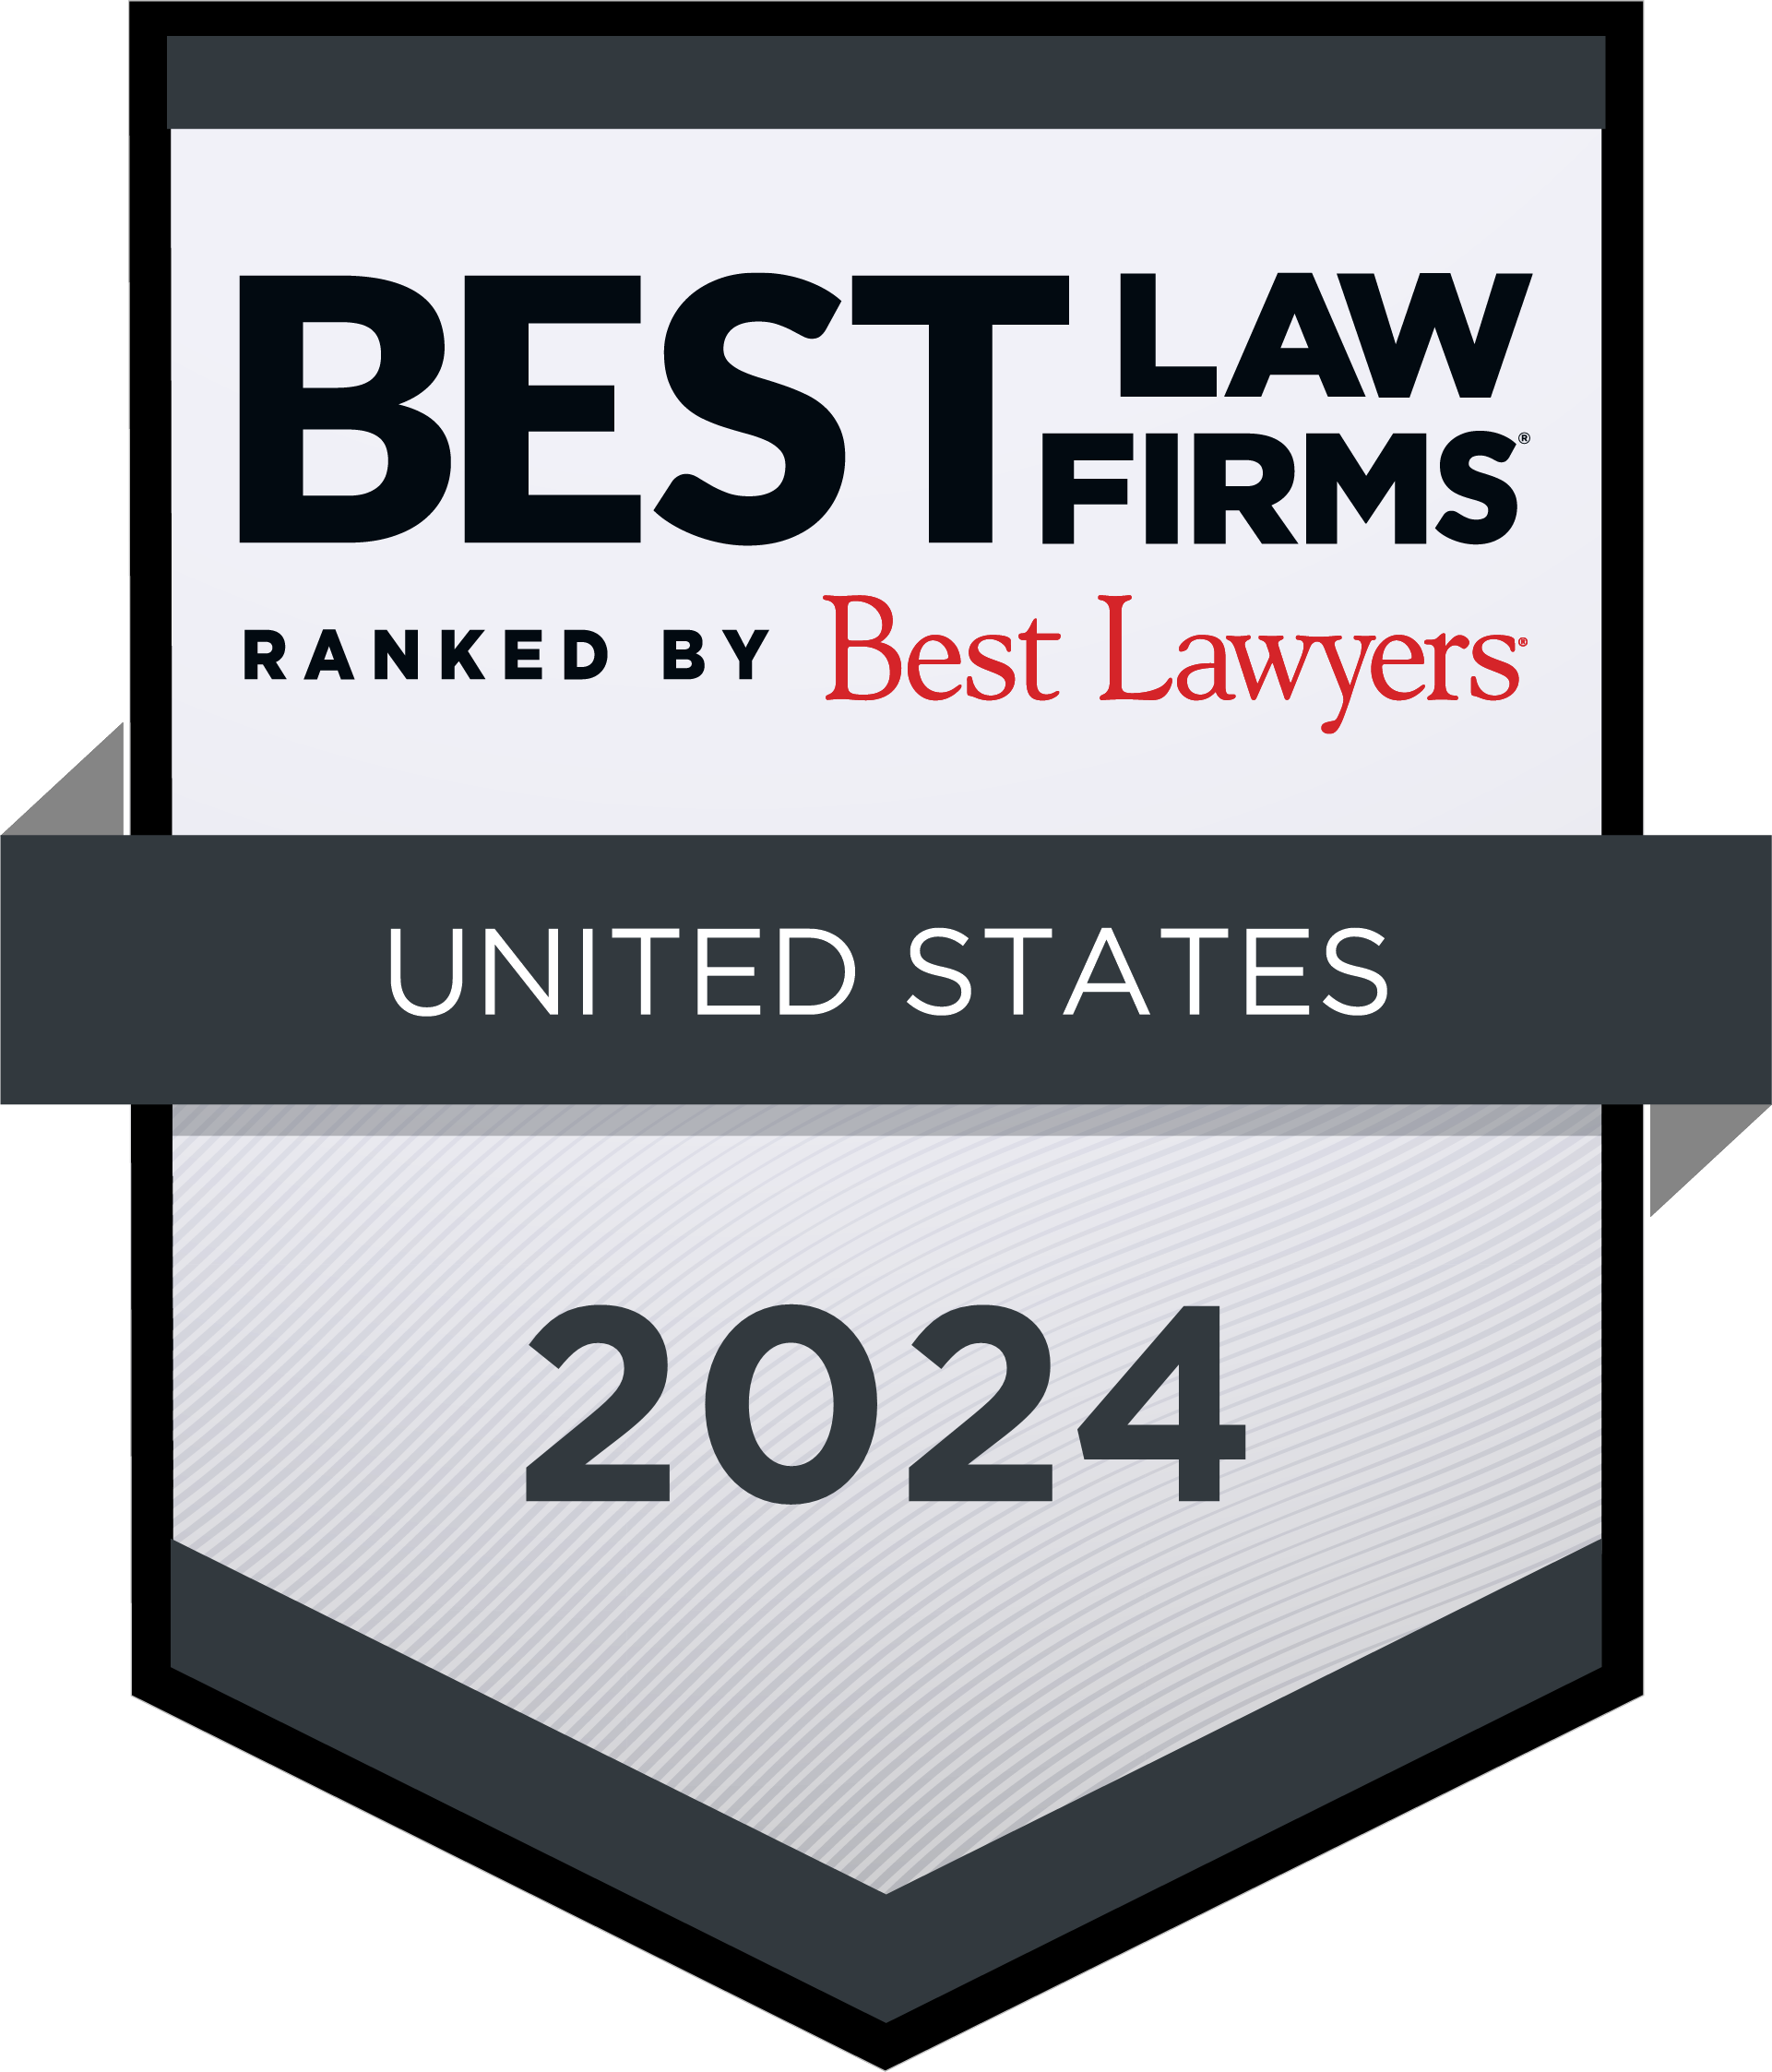 Best Law Firms Ranked by Best Lawyers United States 2024 badge